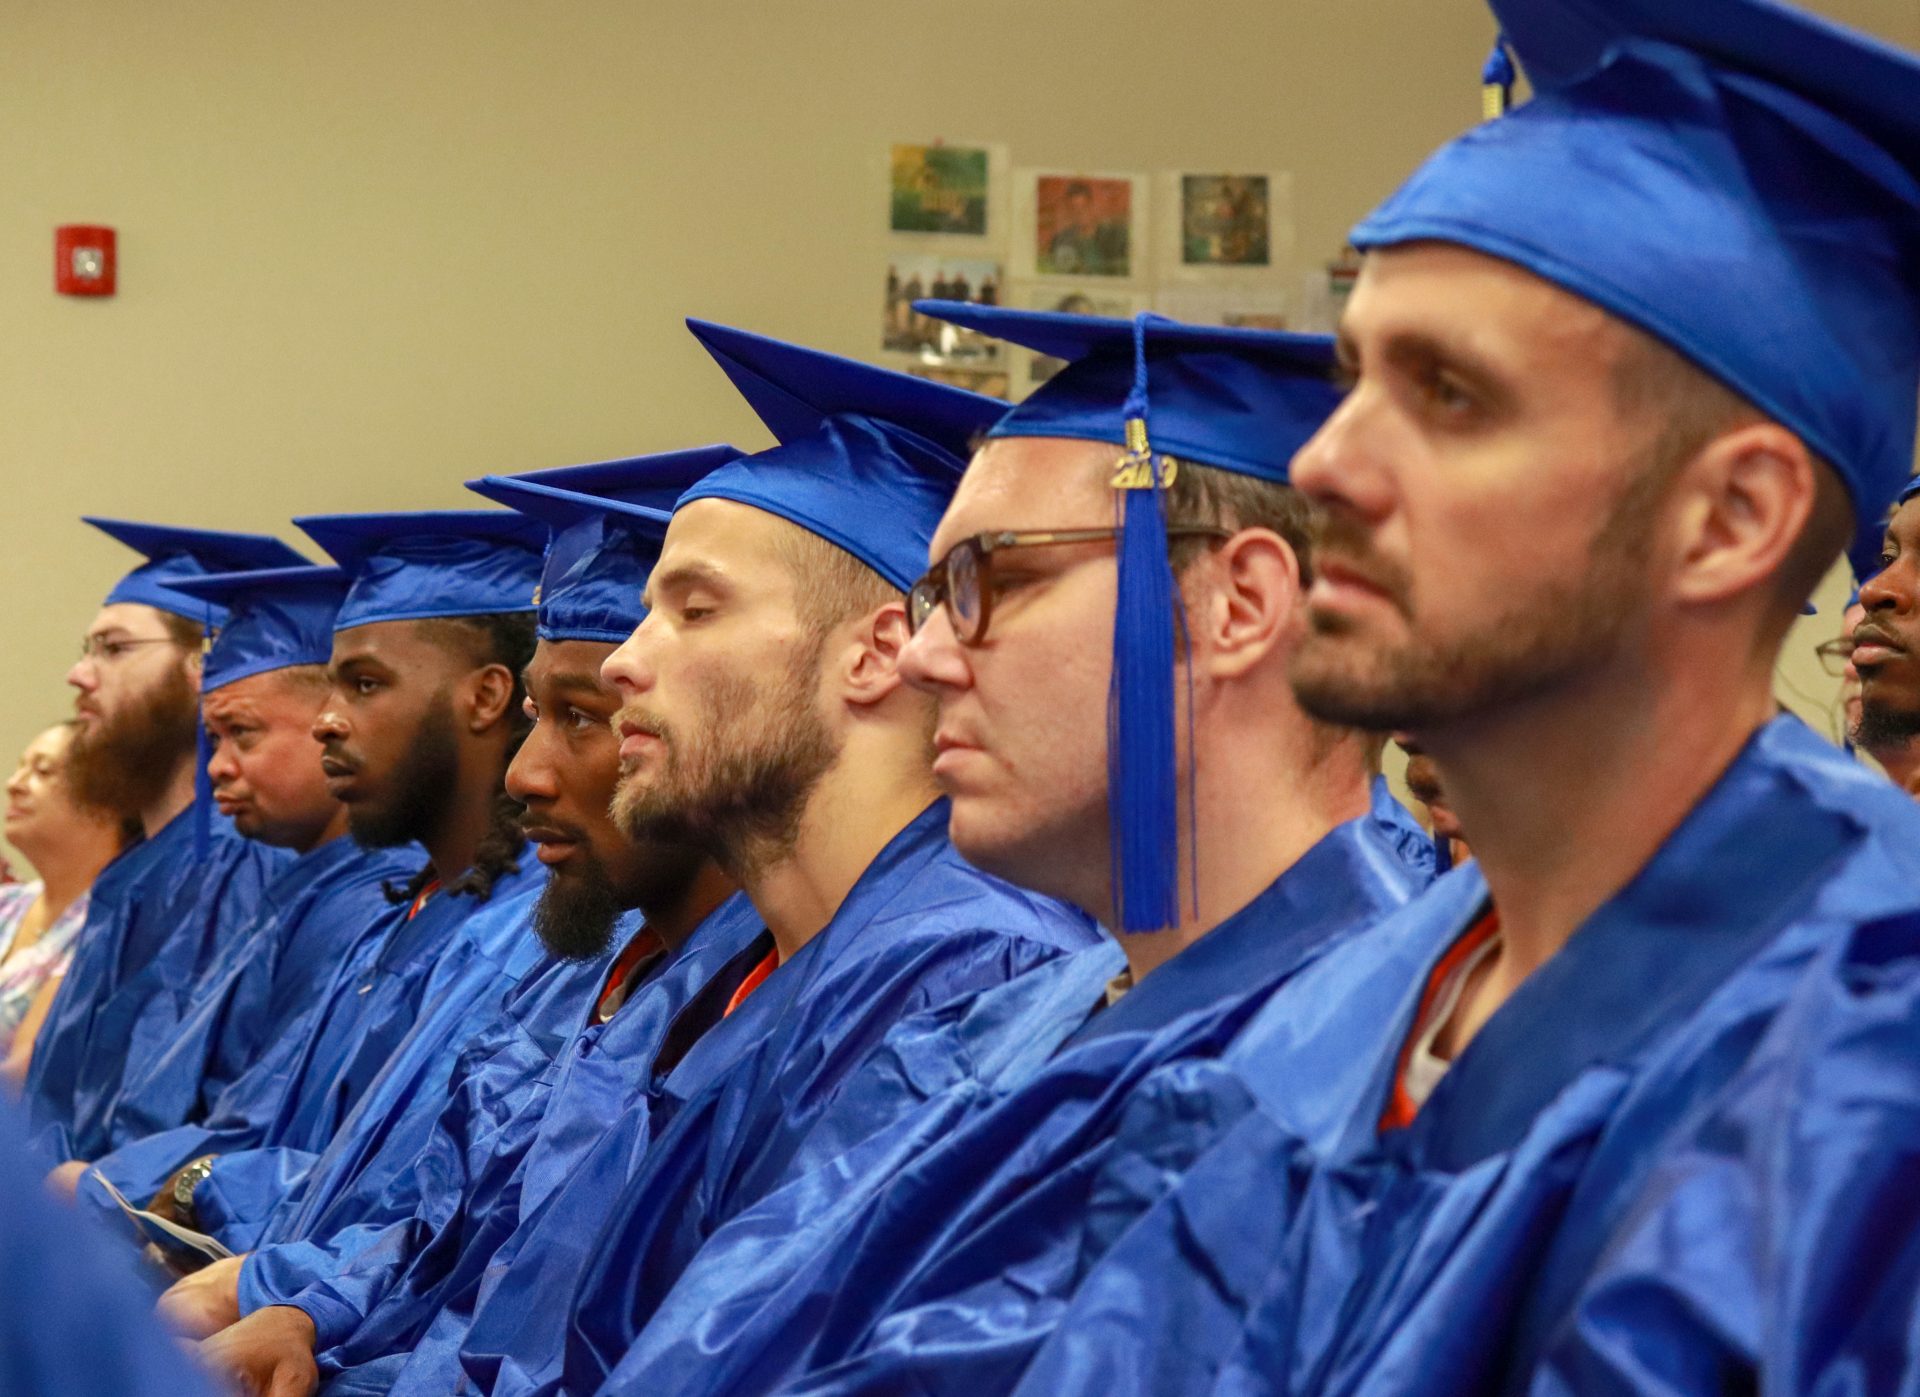 Prisoners in blue graduation gowns sit during graduation ceremony.